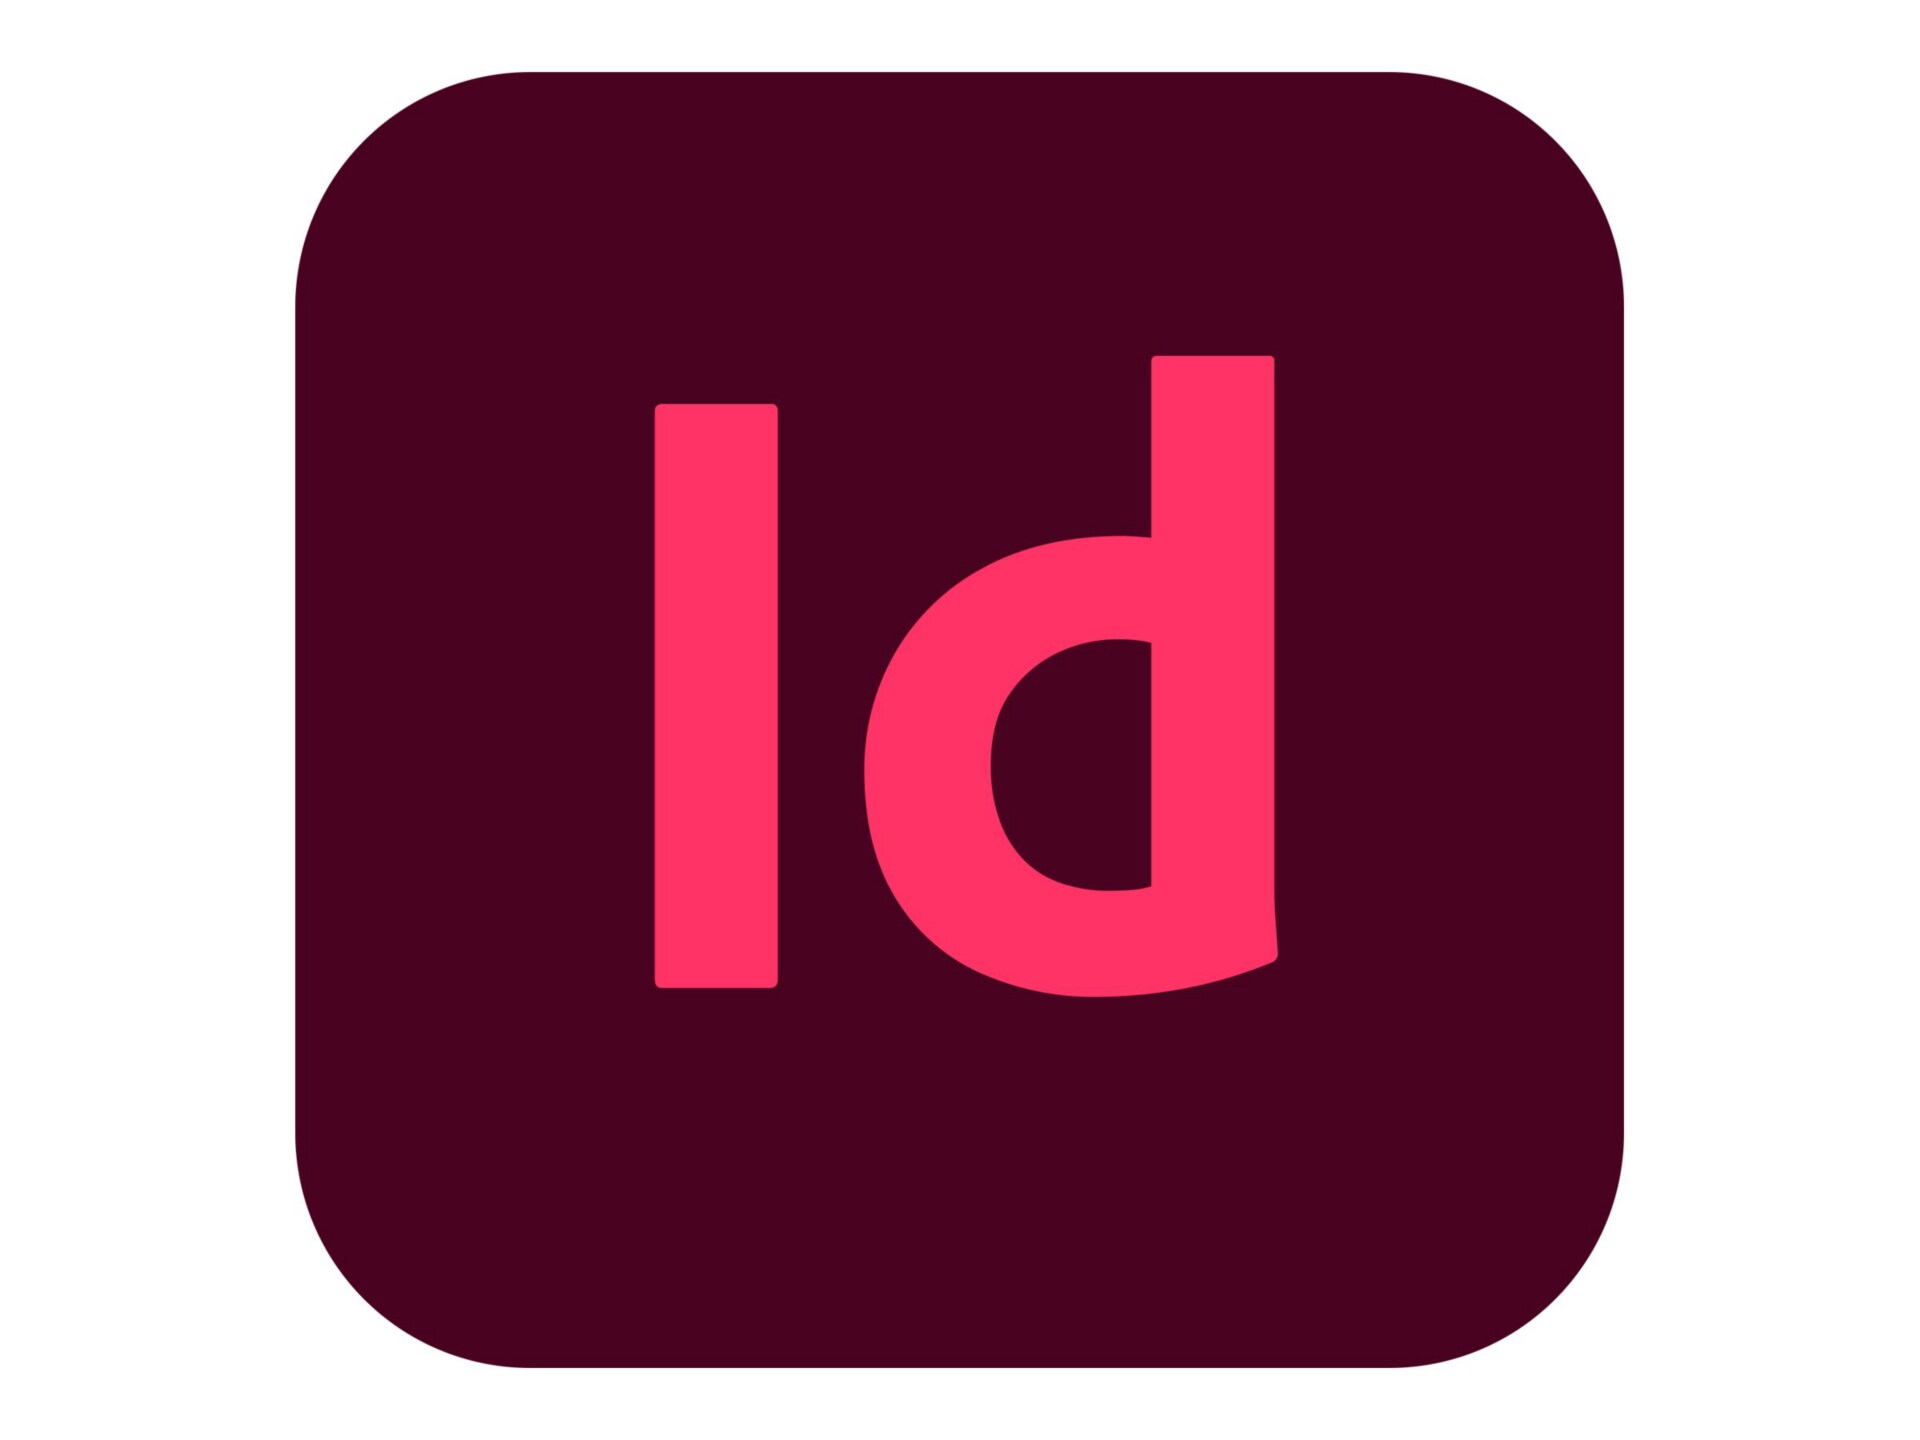 Adobe InDesign CC for teams - Subscription New (4 years) - 1 named user